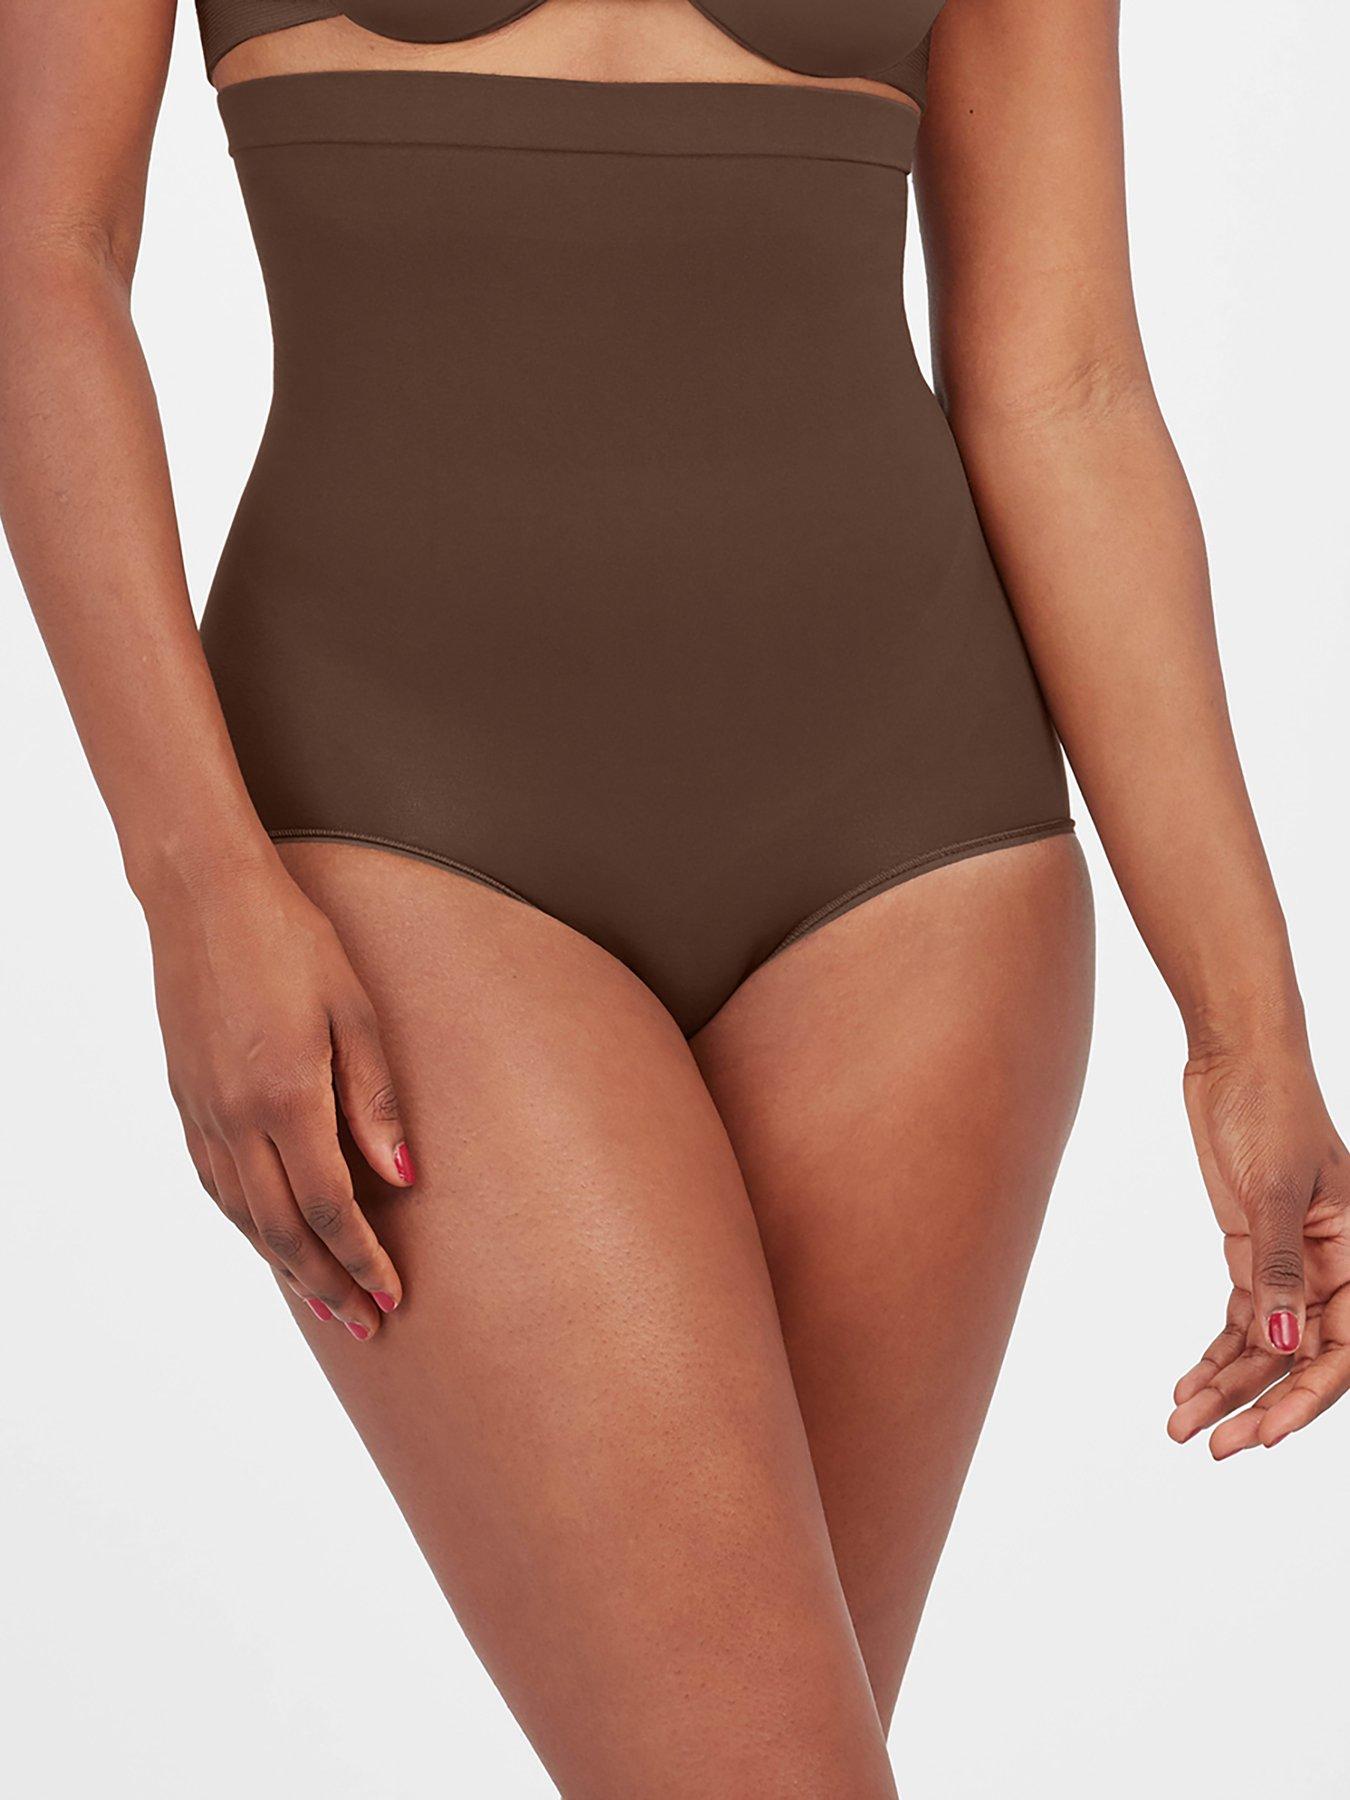 Spanx High Waisted Seemless Shaping Control Panty - Chestnut Brown